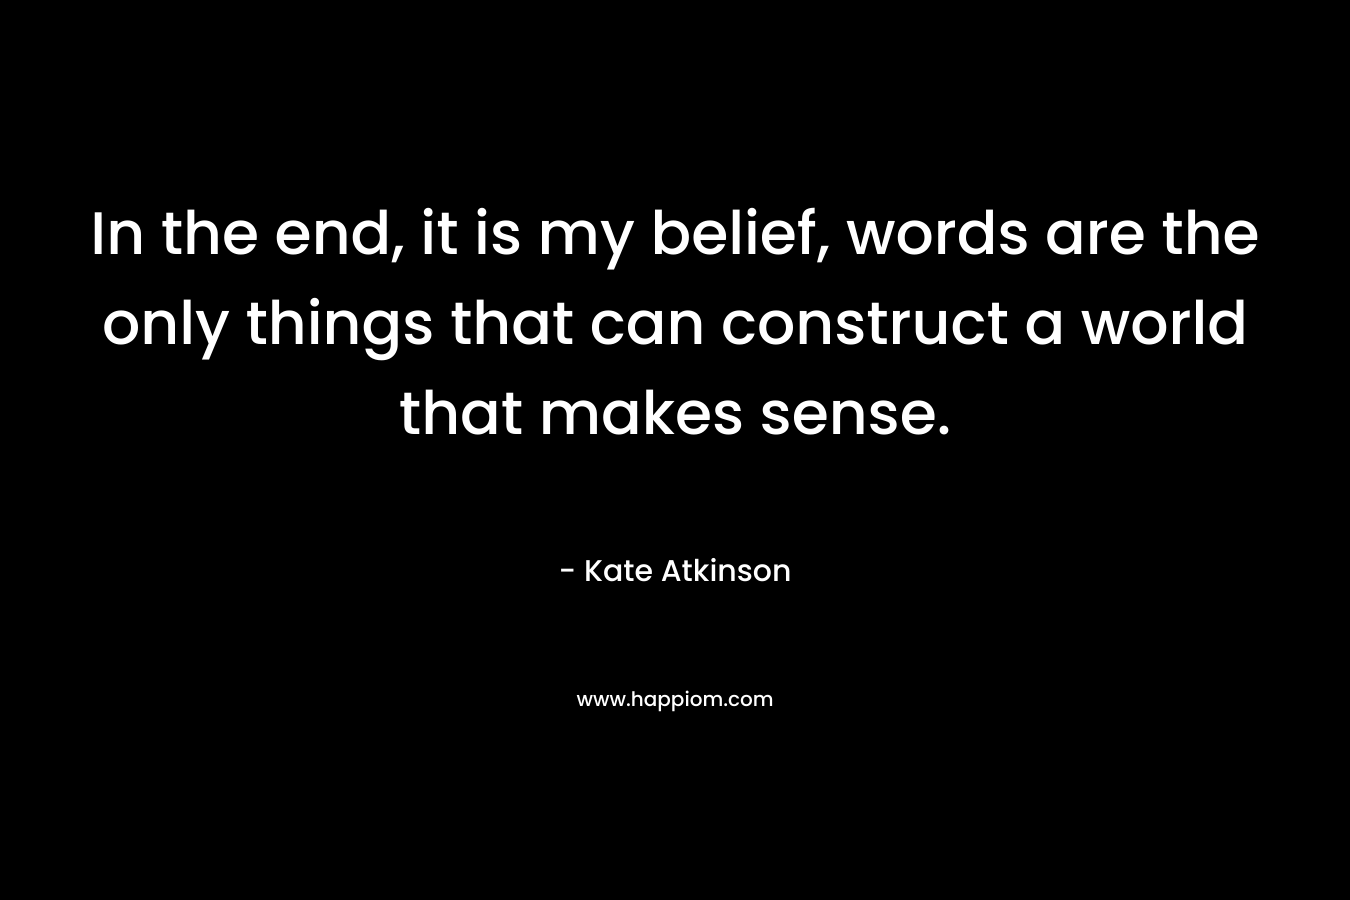 In the end, it is my belief, words are the only things that can construct a world that makes sense.